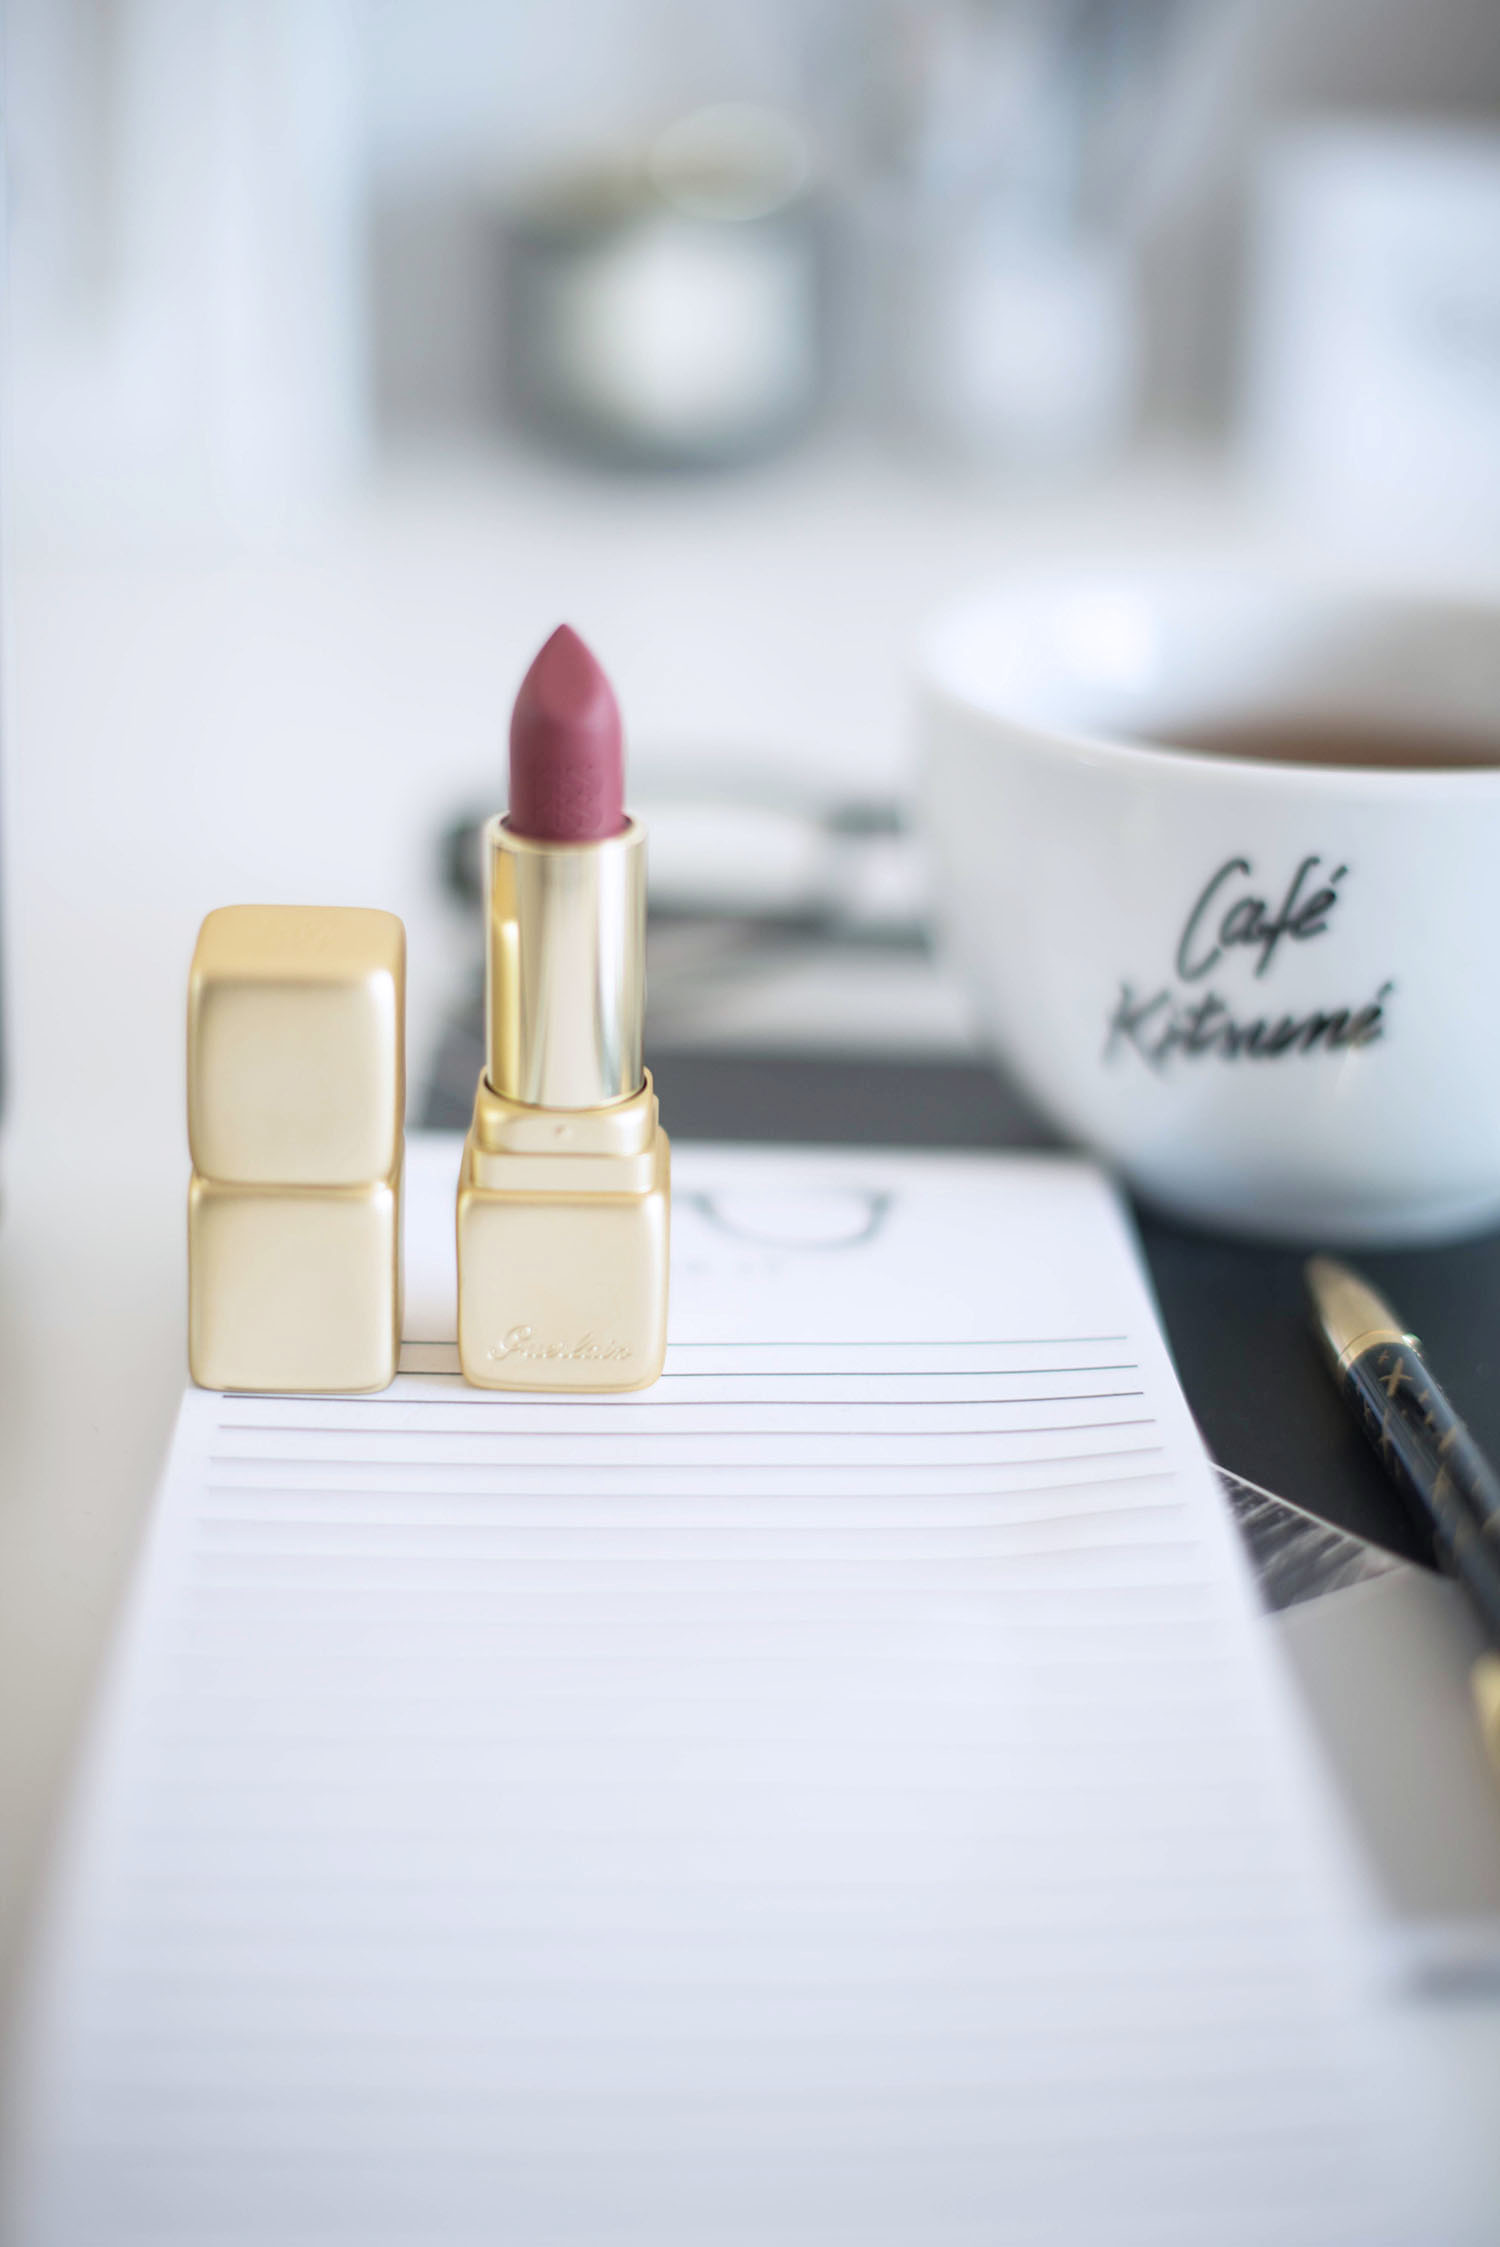 Desk details in the home office of Canadian fashion blogger Cee Fardoe of Coco & Vera, including a gold tube of Guerlain lipstick and a Cafe Kitsune cup